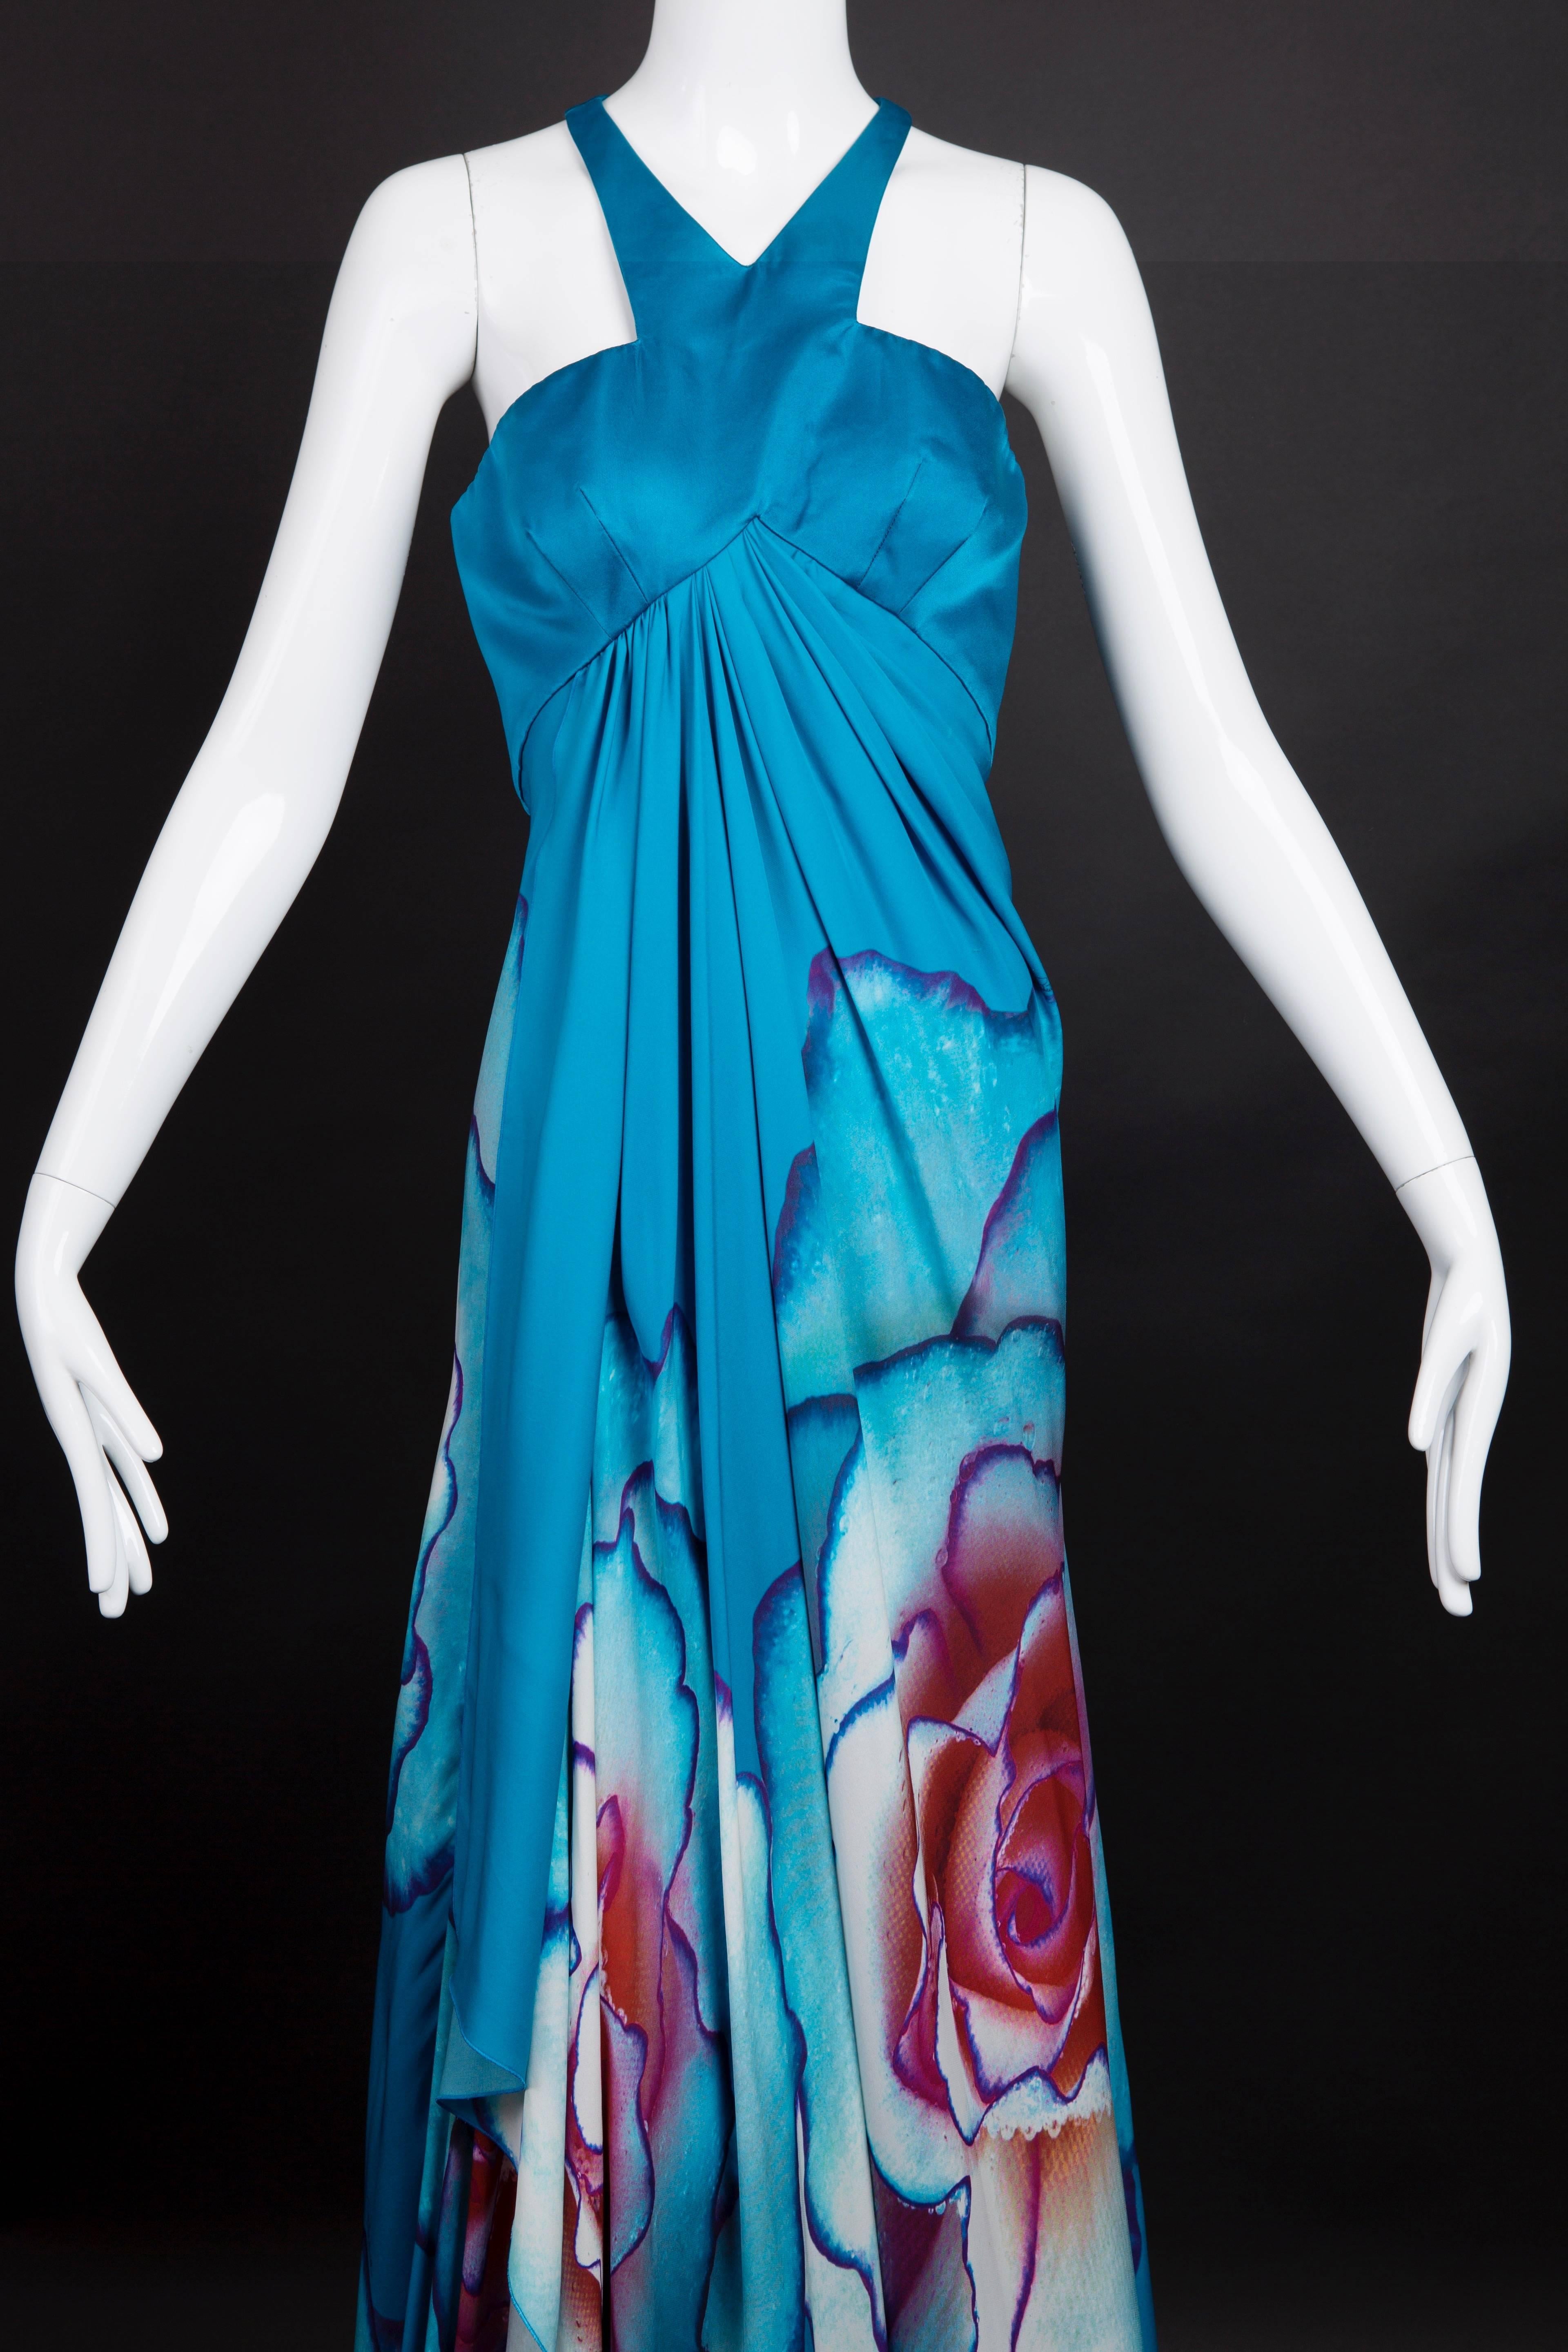 Stunning evening gown in a teal silk satin bodice and a flowing floral print skirt. The wrap from skirt falls in gathers from the raised waistline seam. The skirt is also teal with a large white, purple, blue and mulberry floral print. Zipper